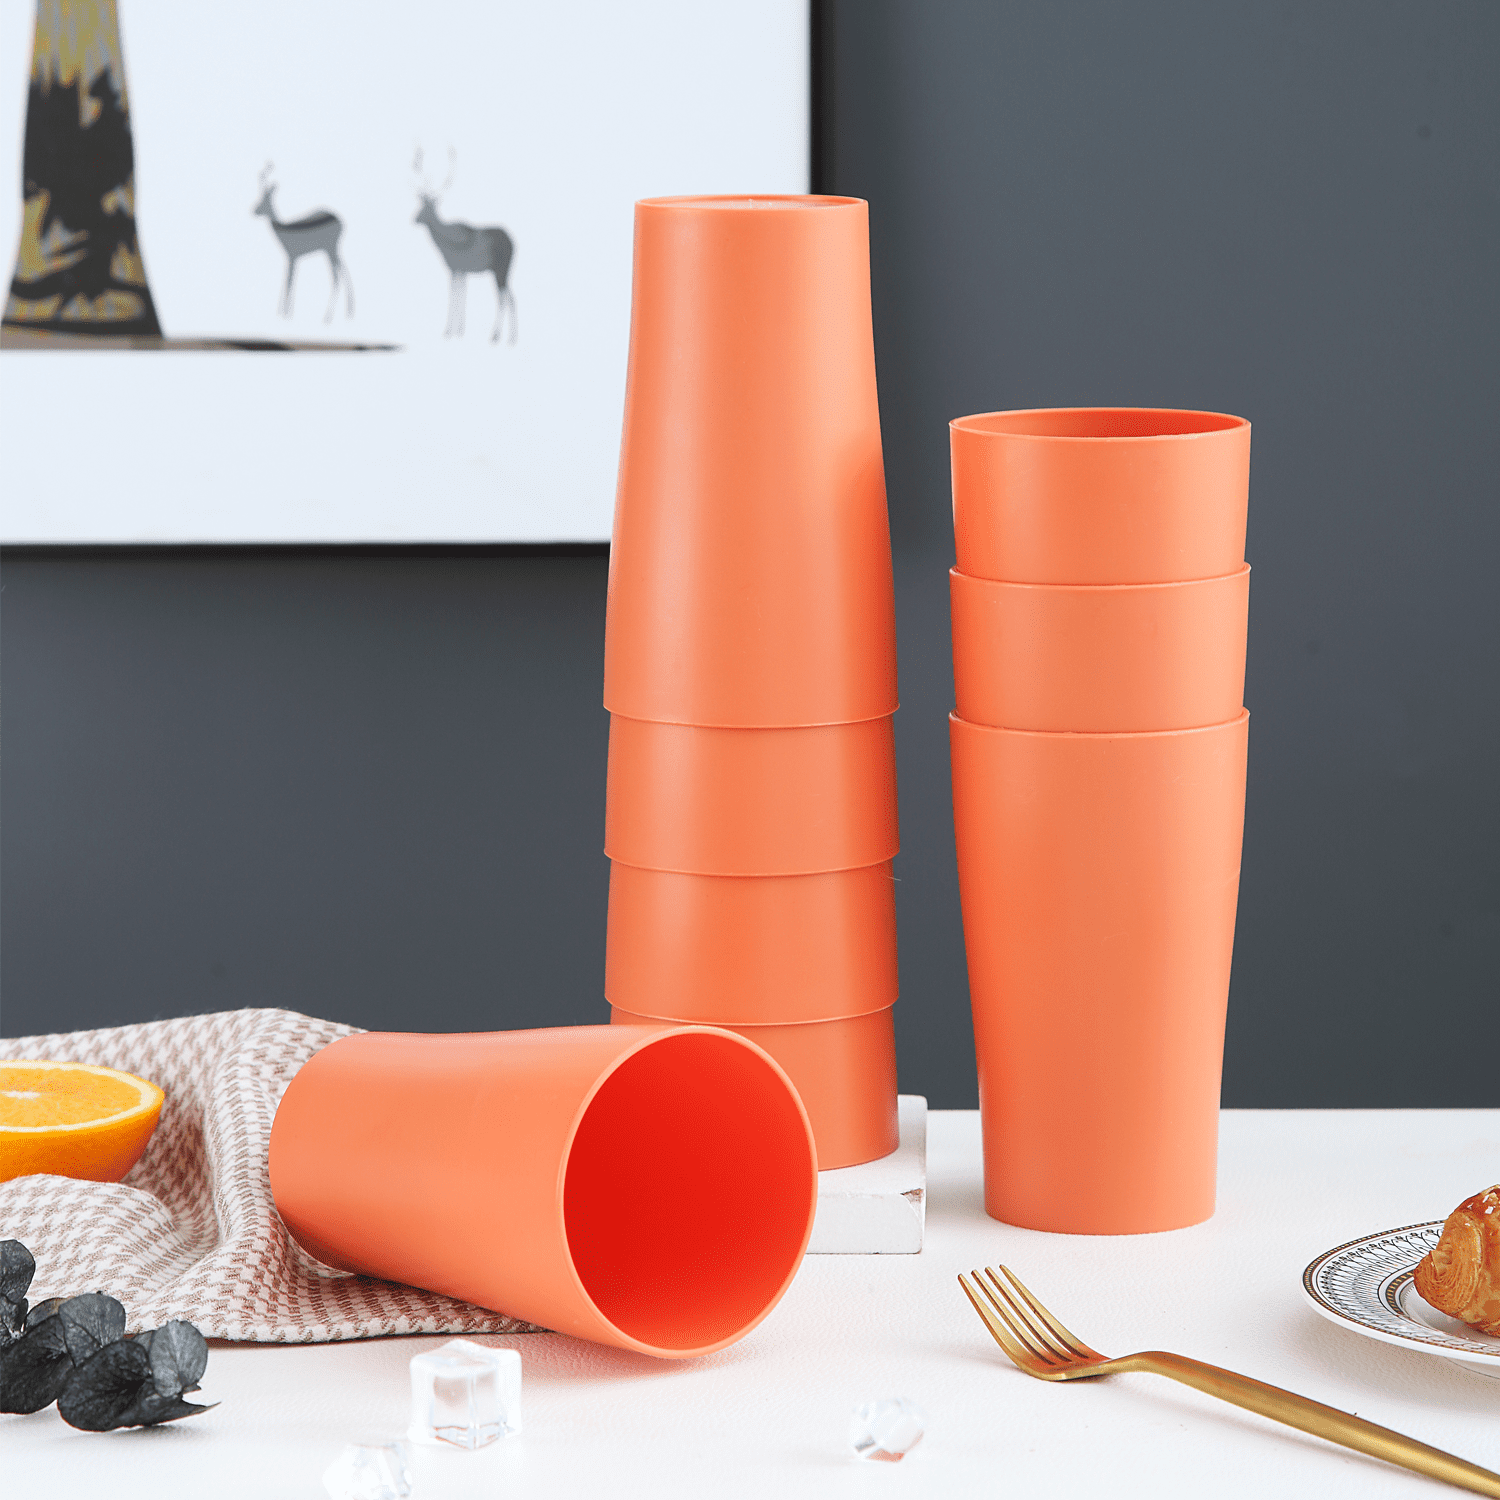 8PCS Plastic Cups Reusable Unbreakable Water Drinking Cup,Toiletry